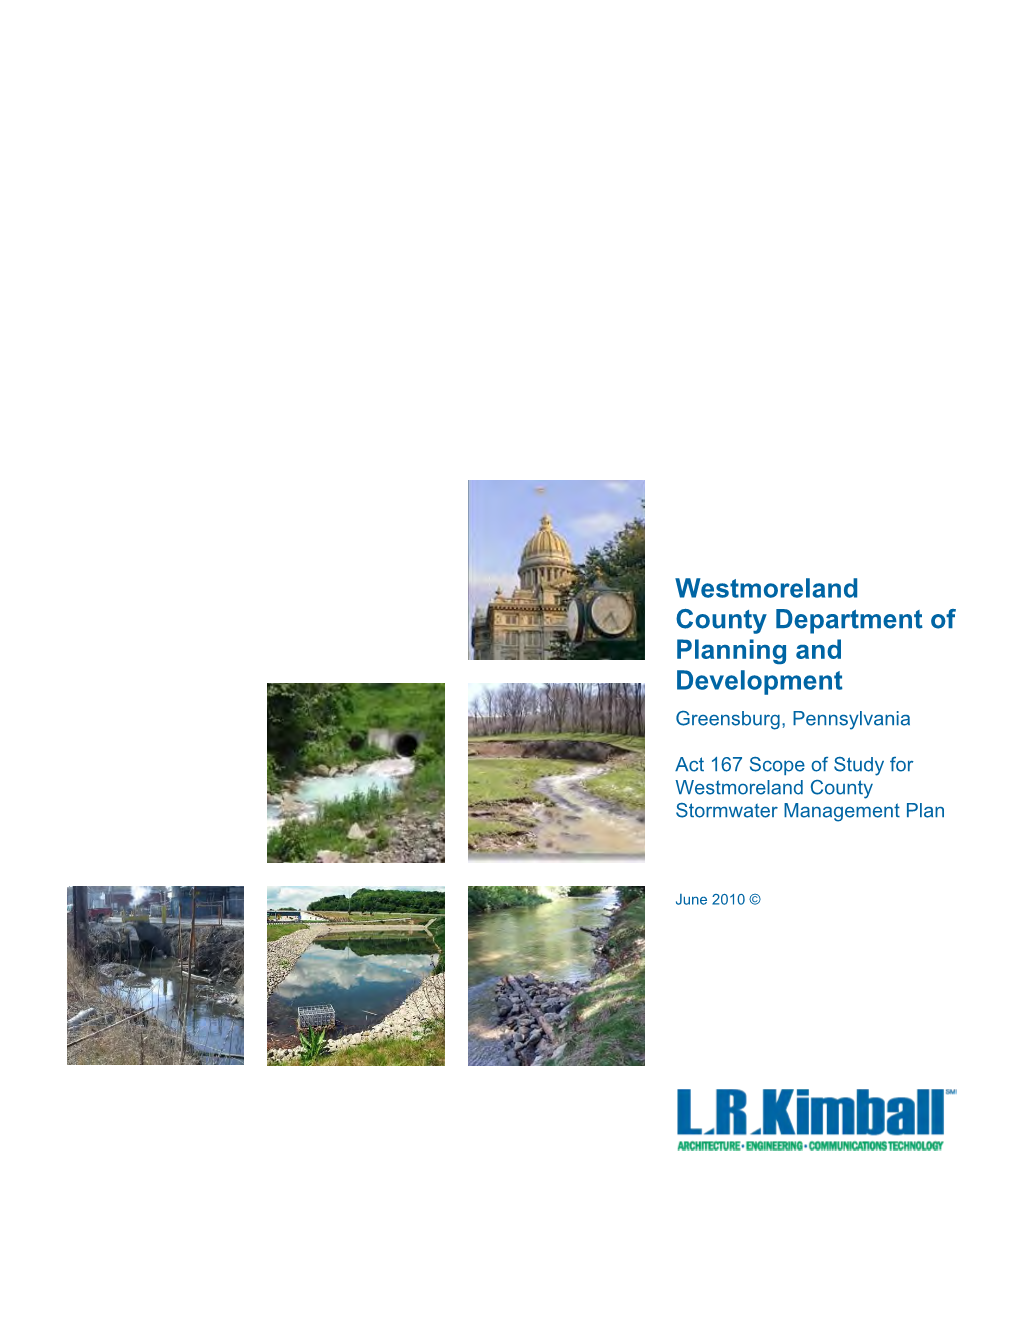 Westmoreland County Department of Planning and Development